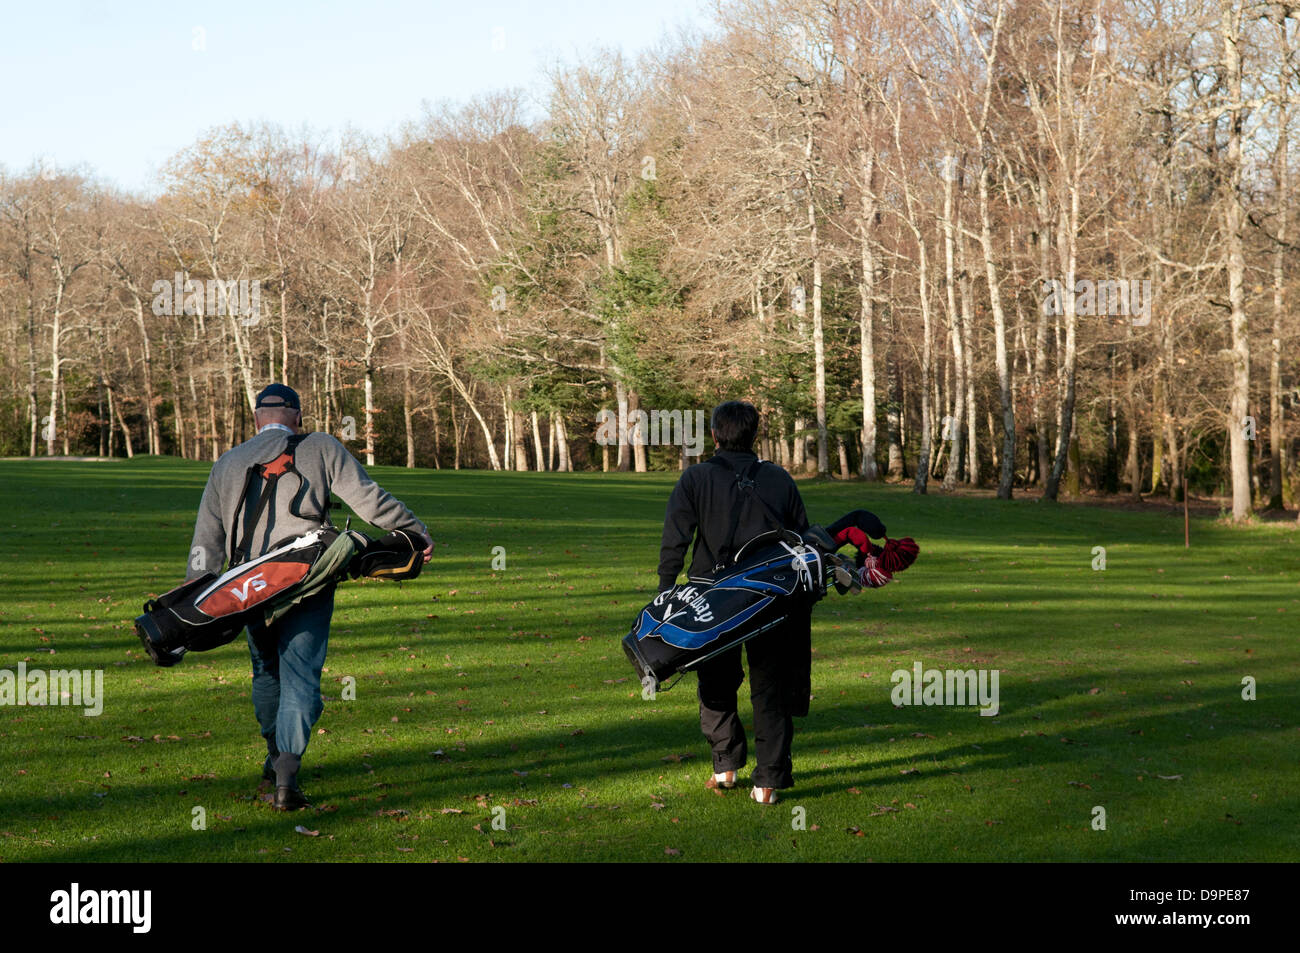 Two golf players on a golf course. Stock Photo